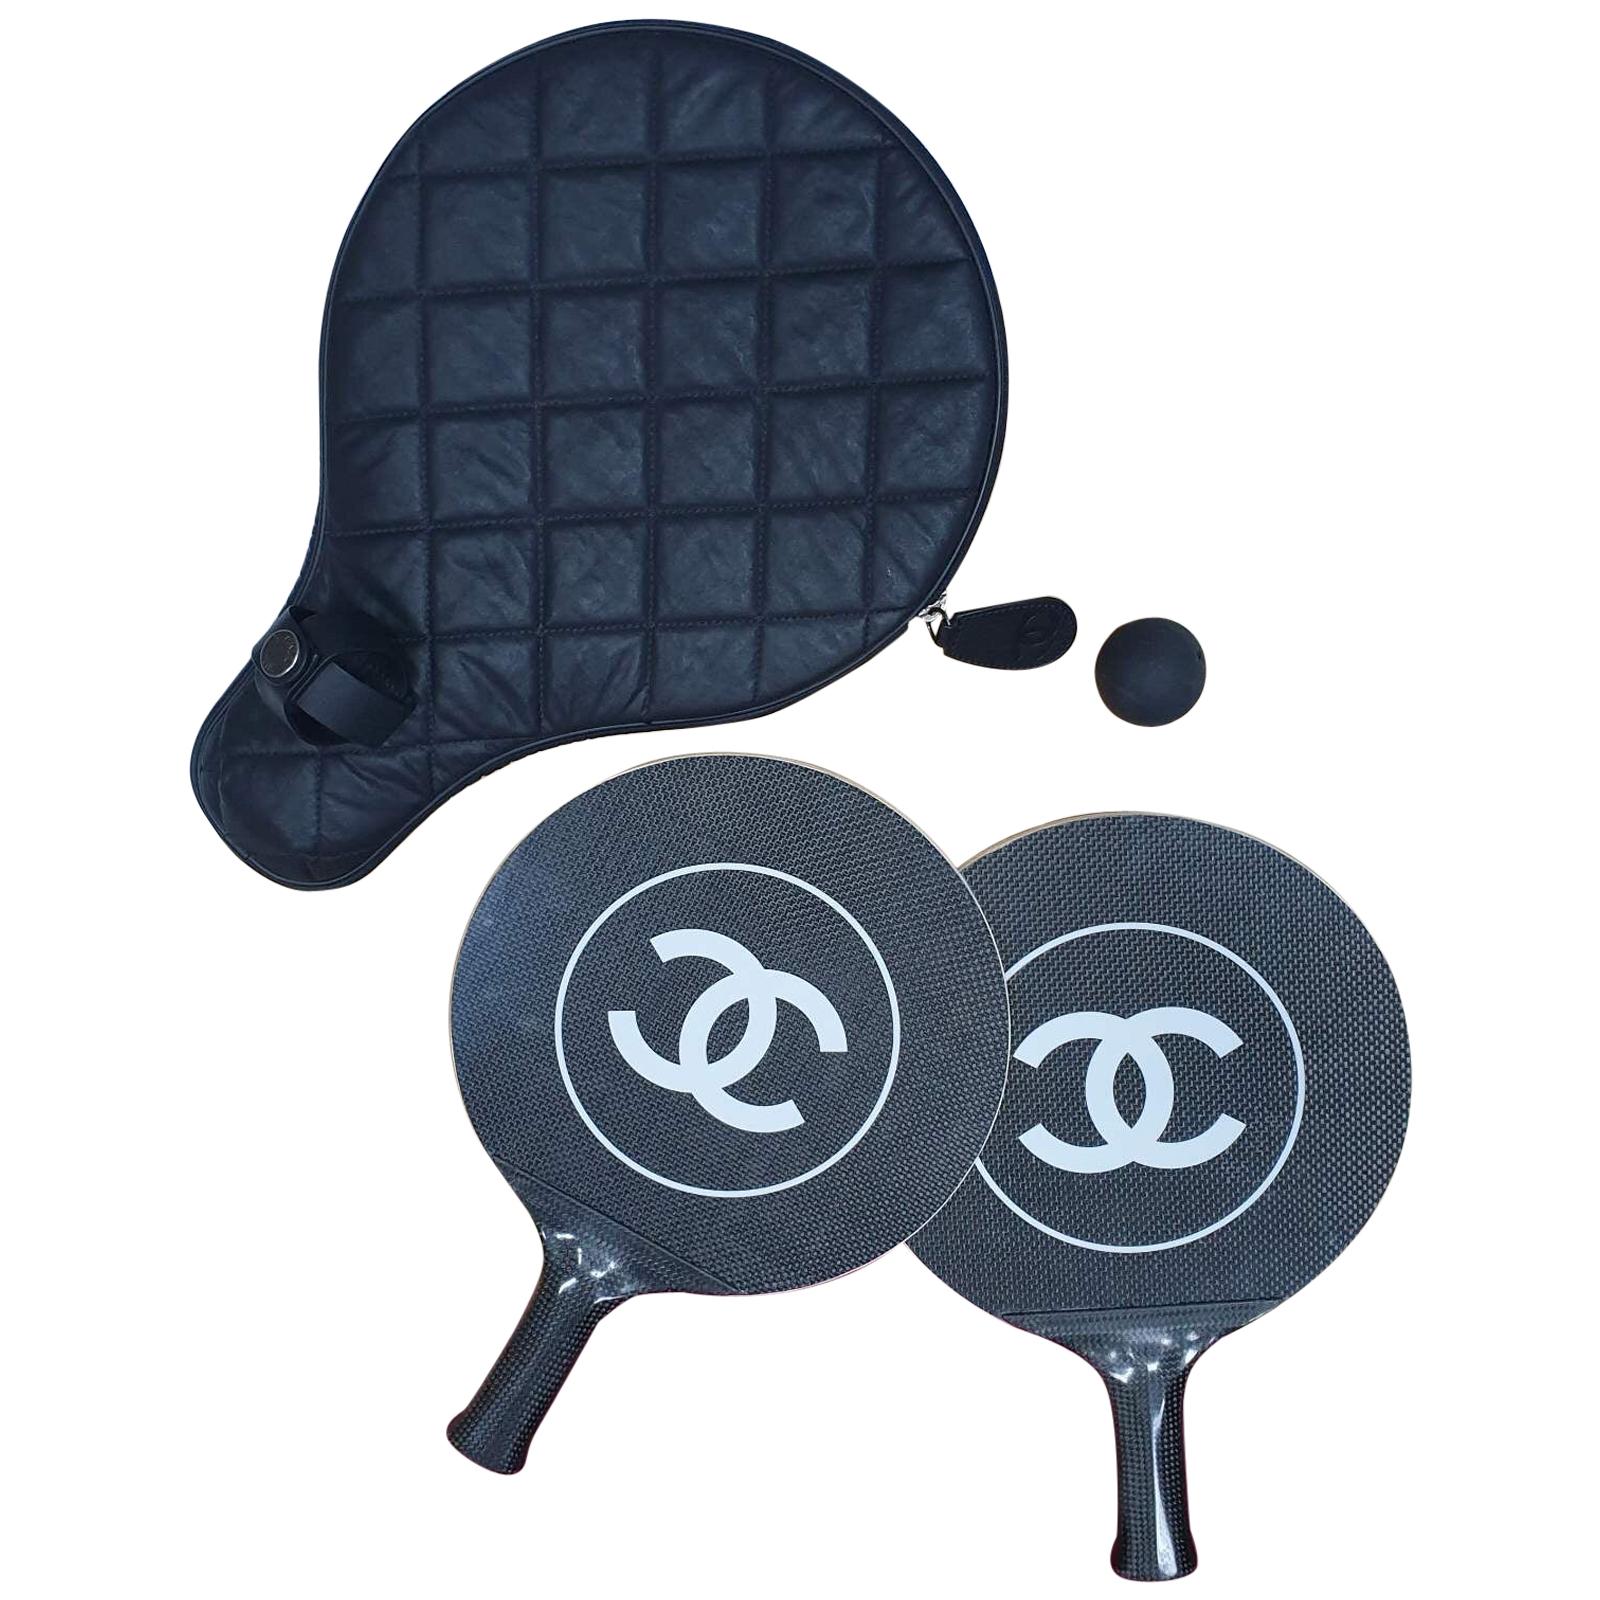 Chanel Tennis Ping Pong Carbon Fiber Paddles Racket set with